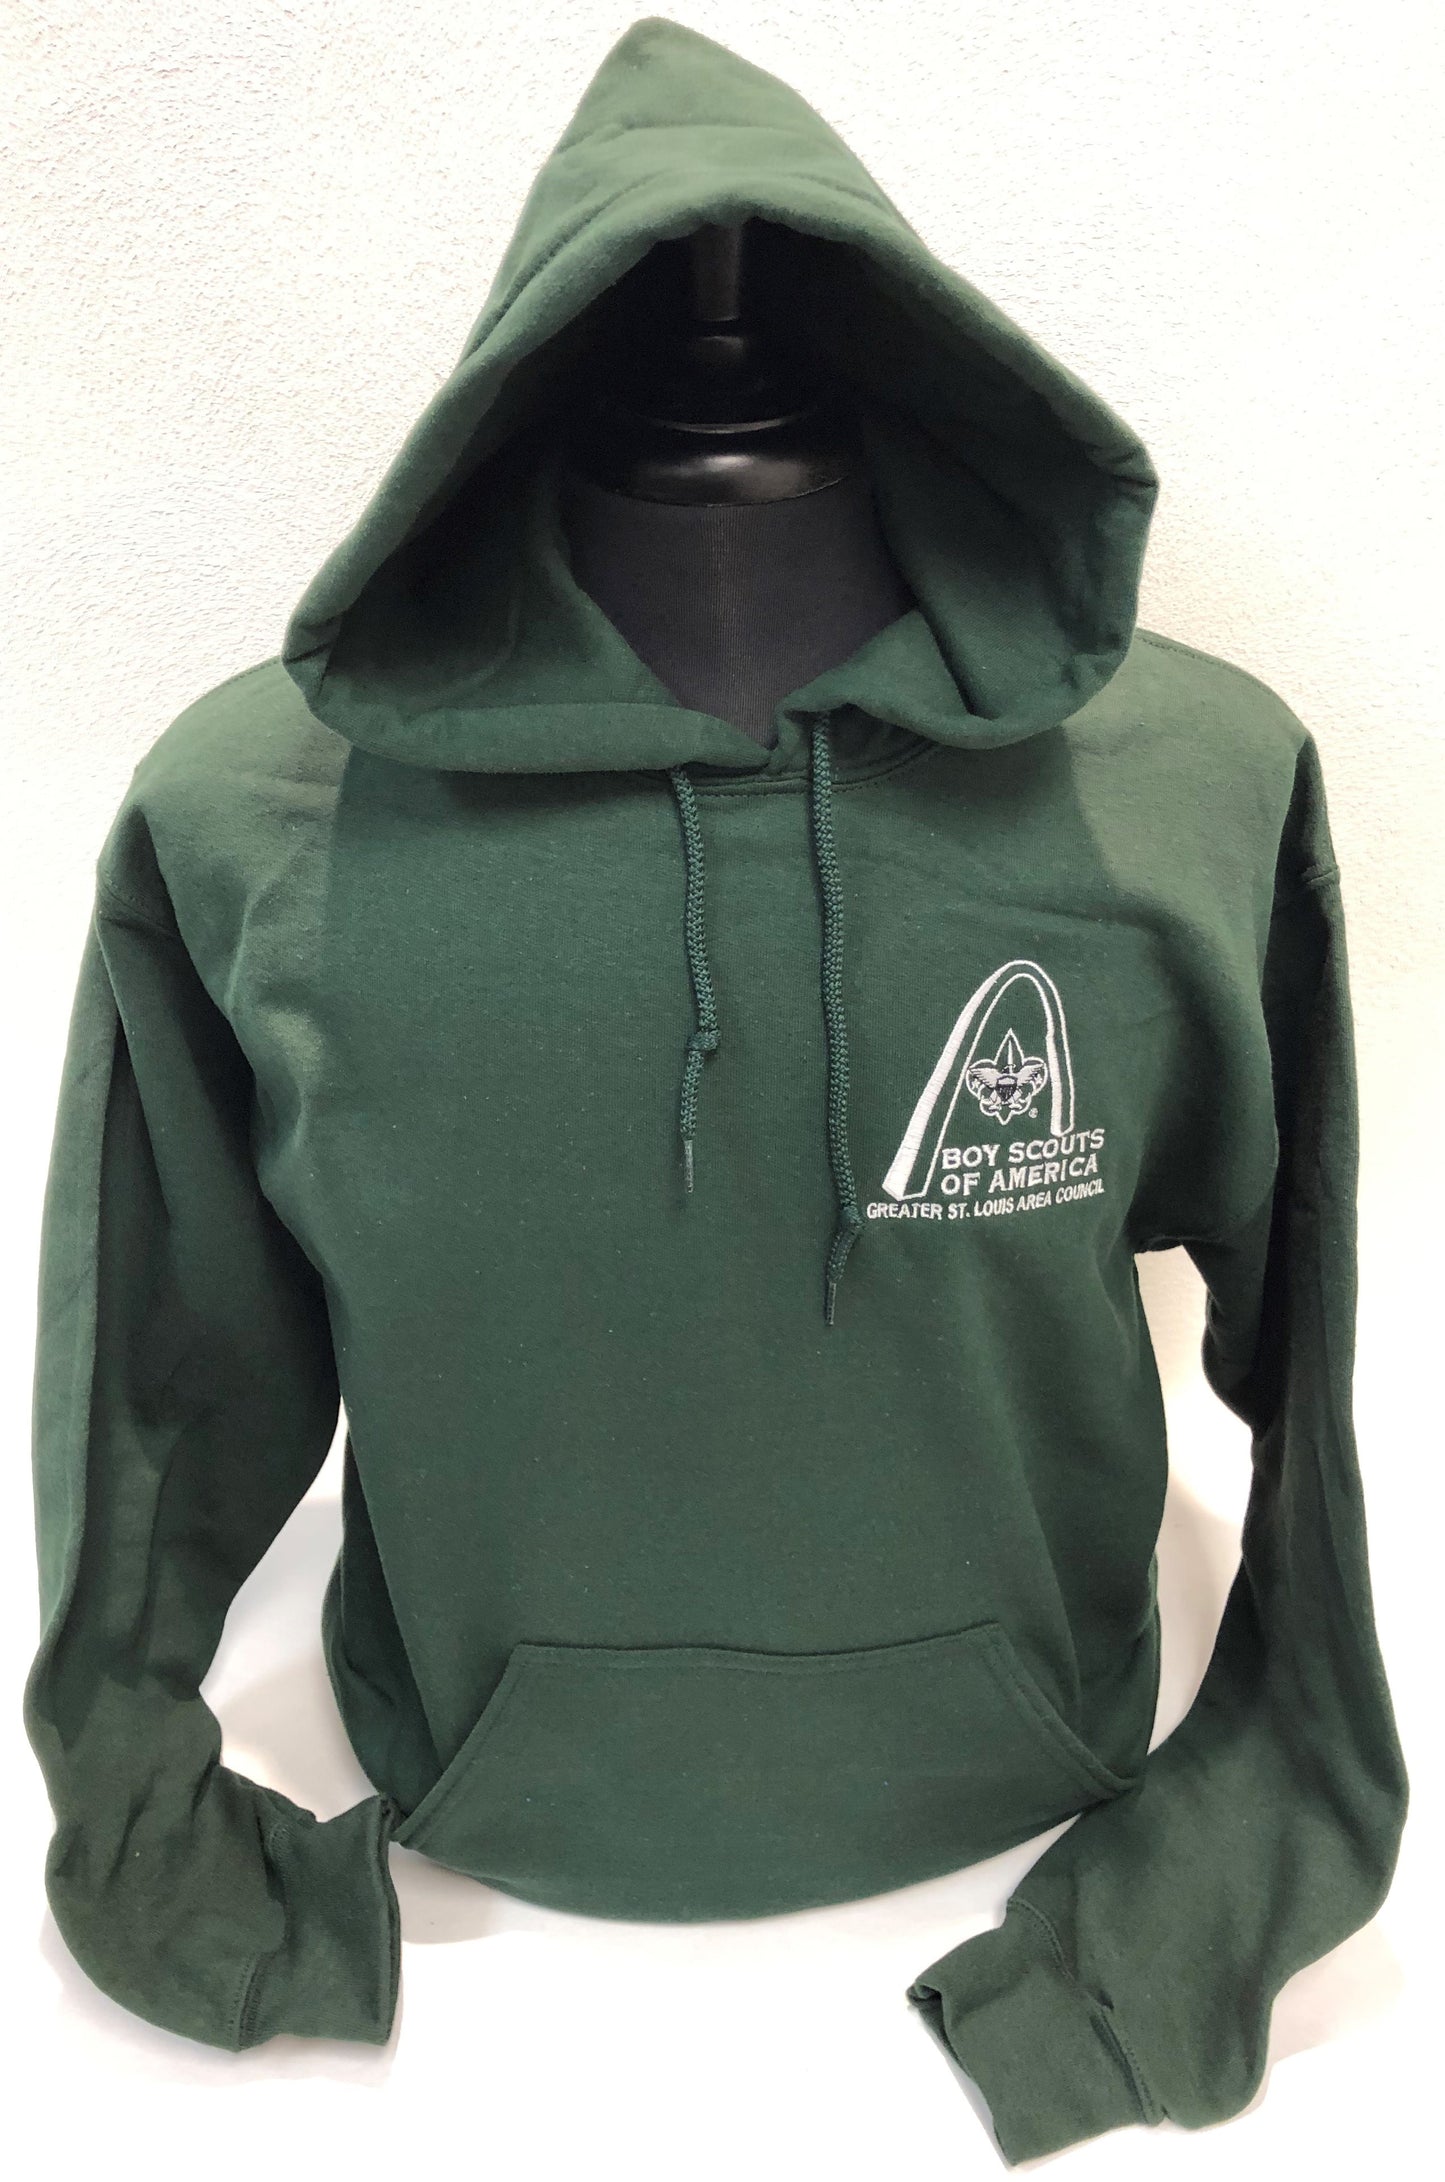 Hoodie - GSLAC Arch - Men's Hunter Green - Embroidered Logo